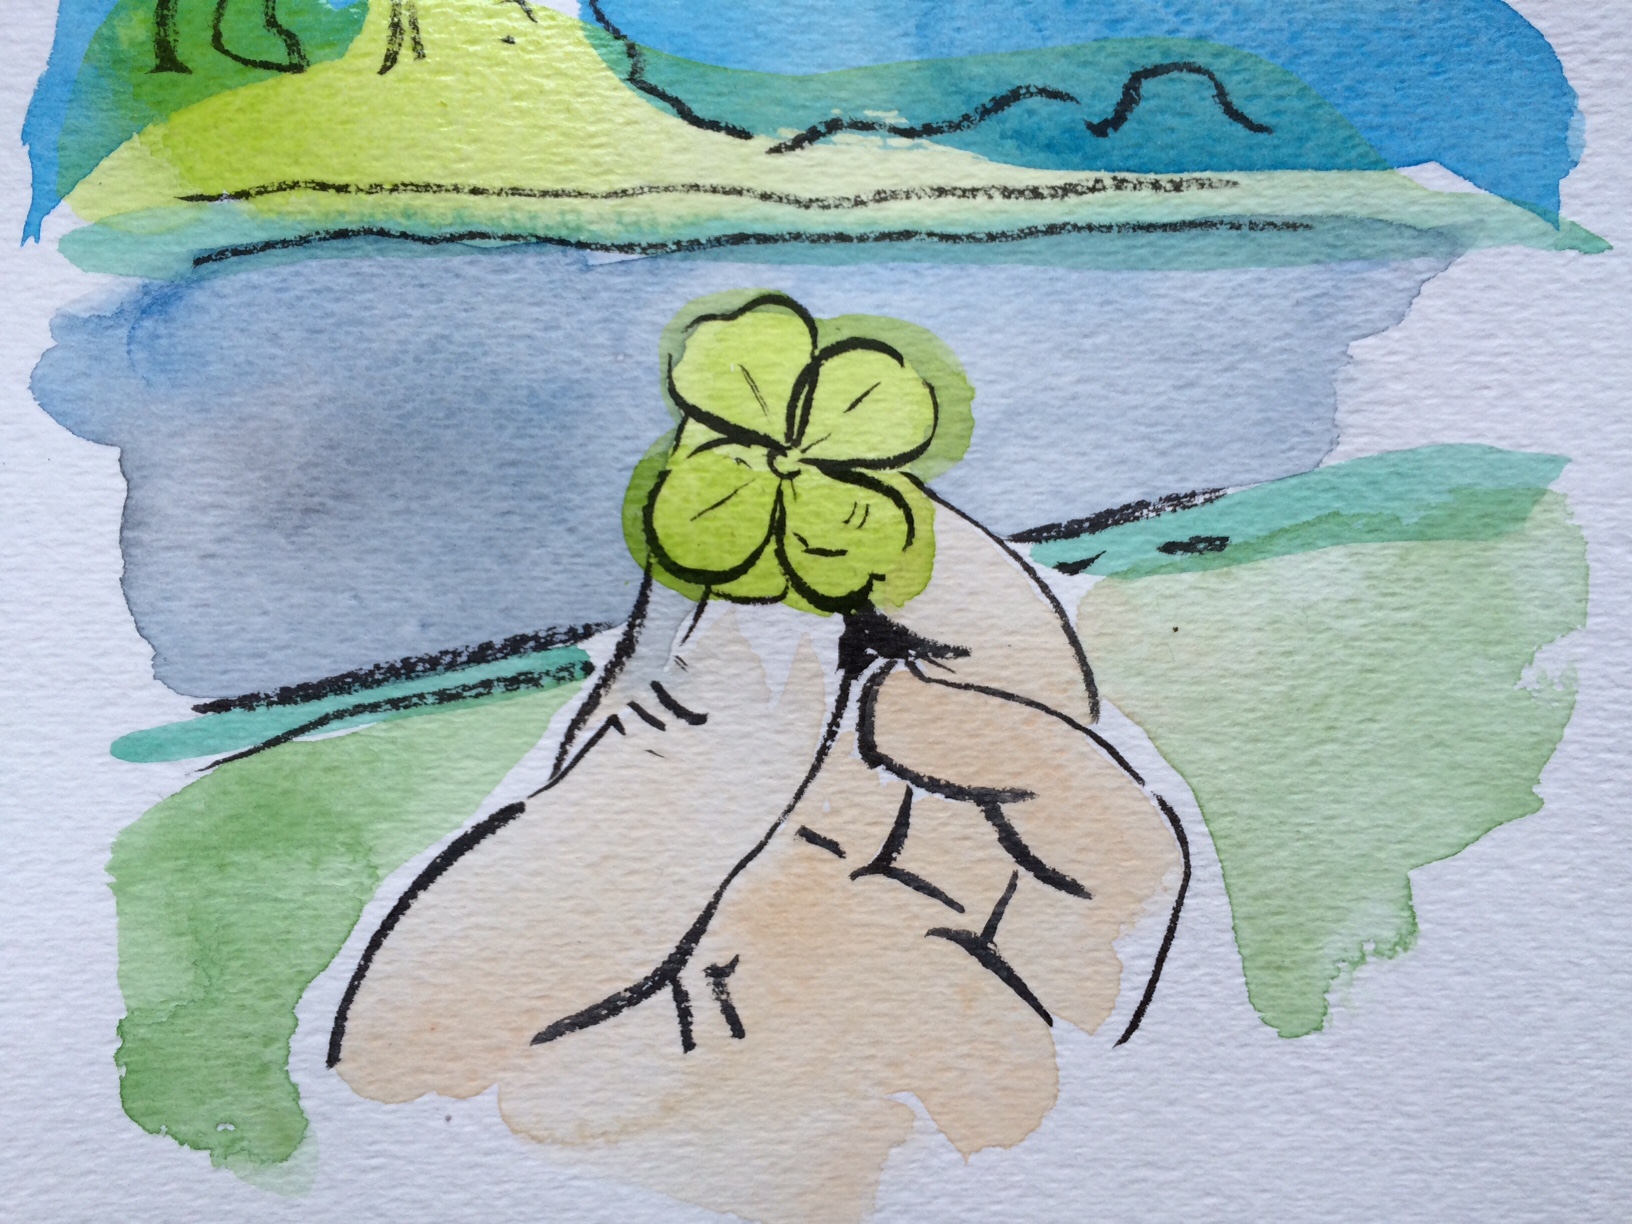 Garden Q&A: Try your luck with four-leaf clover